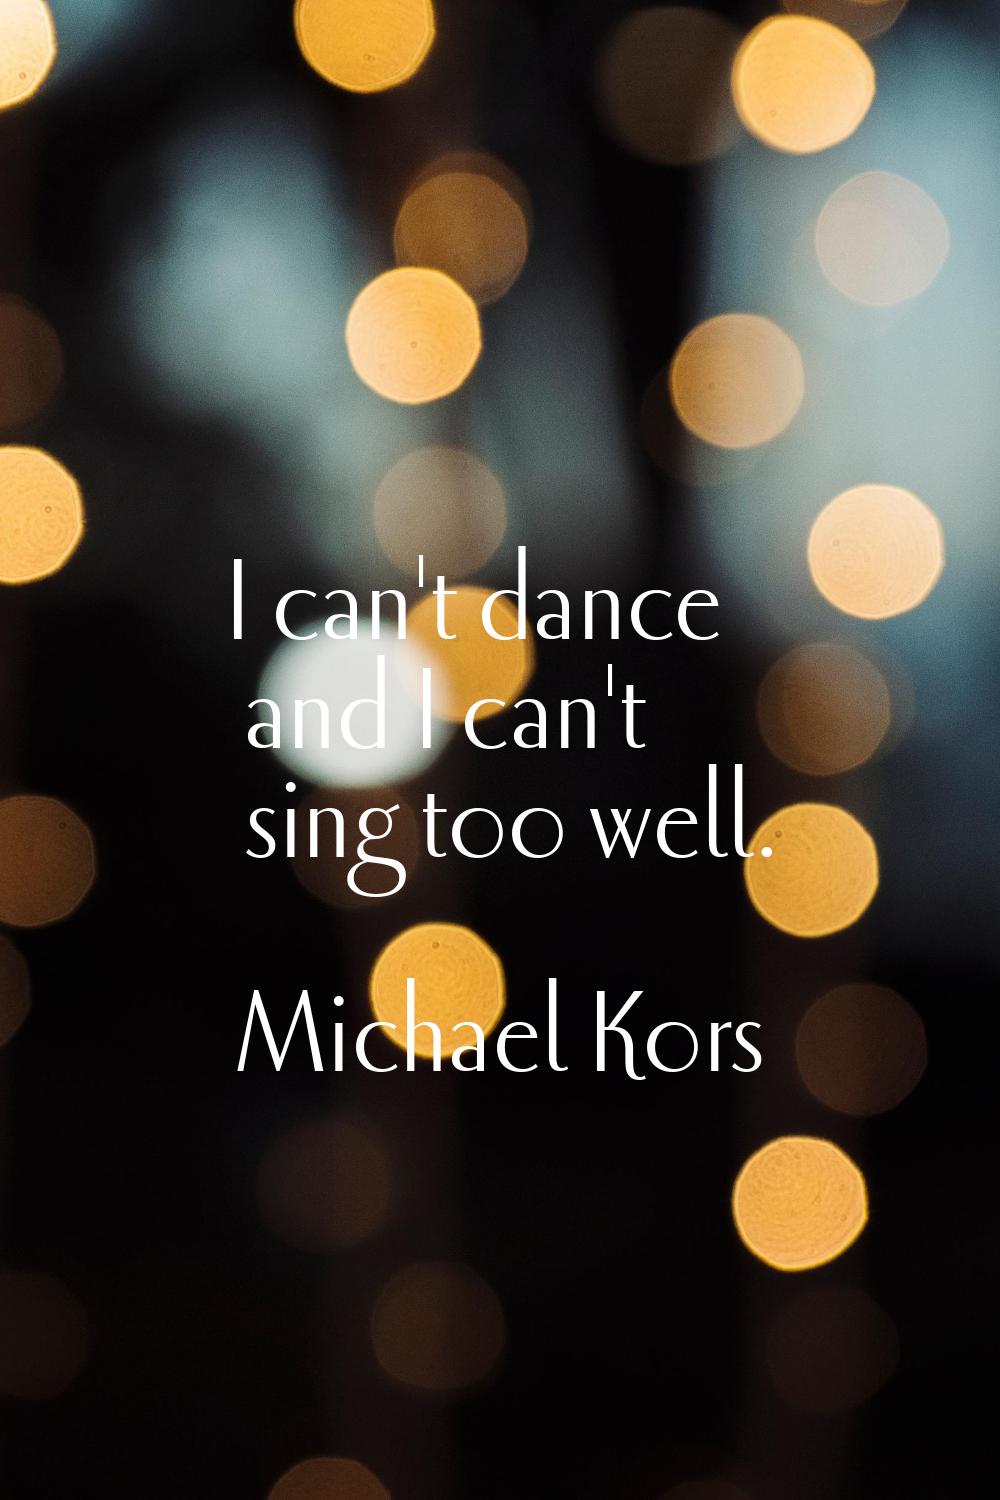 I can't dance and I can't sing too well.